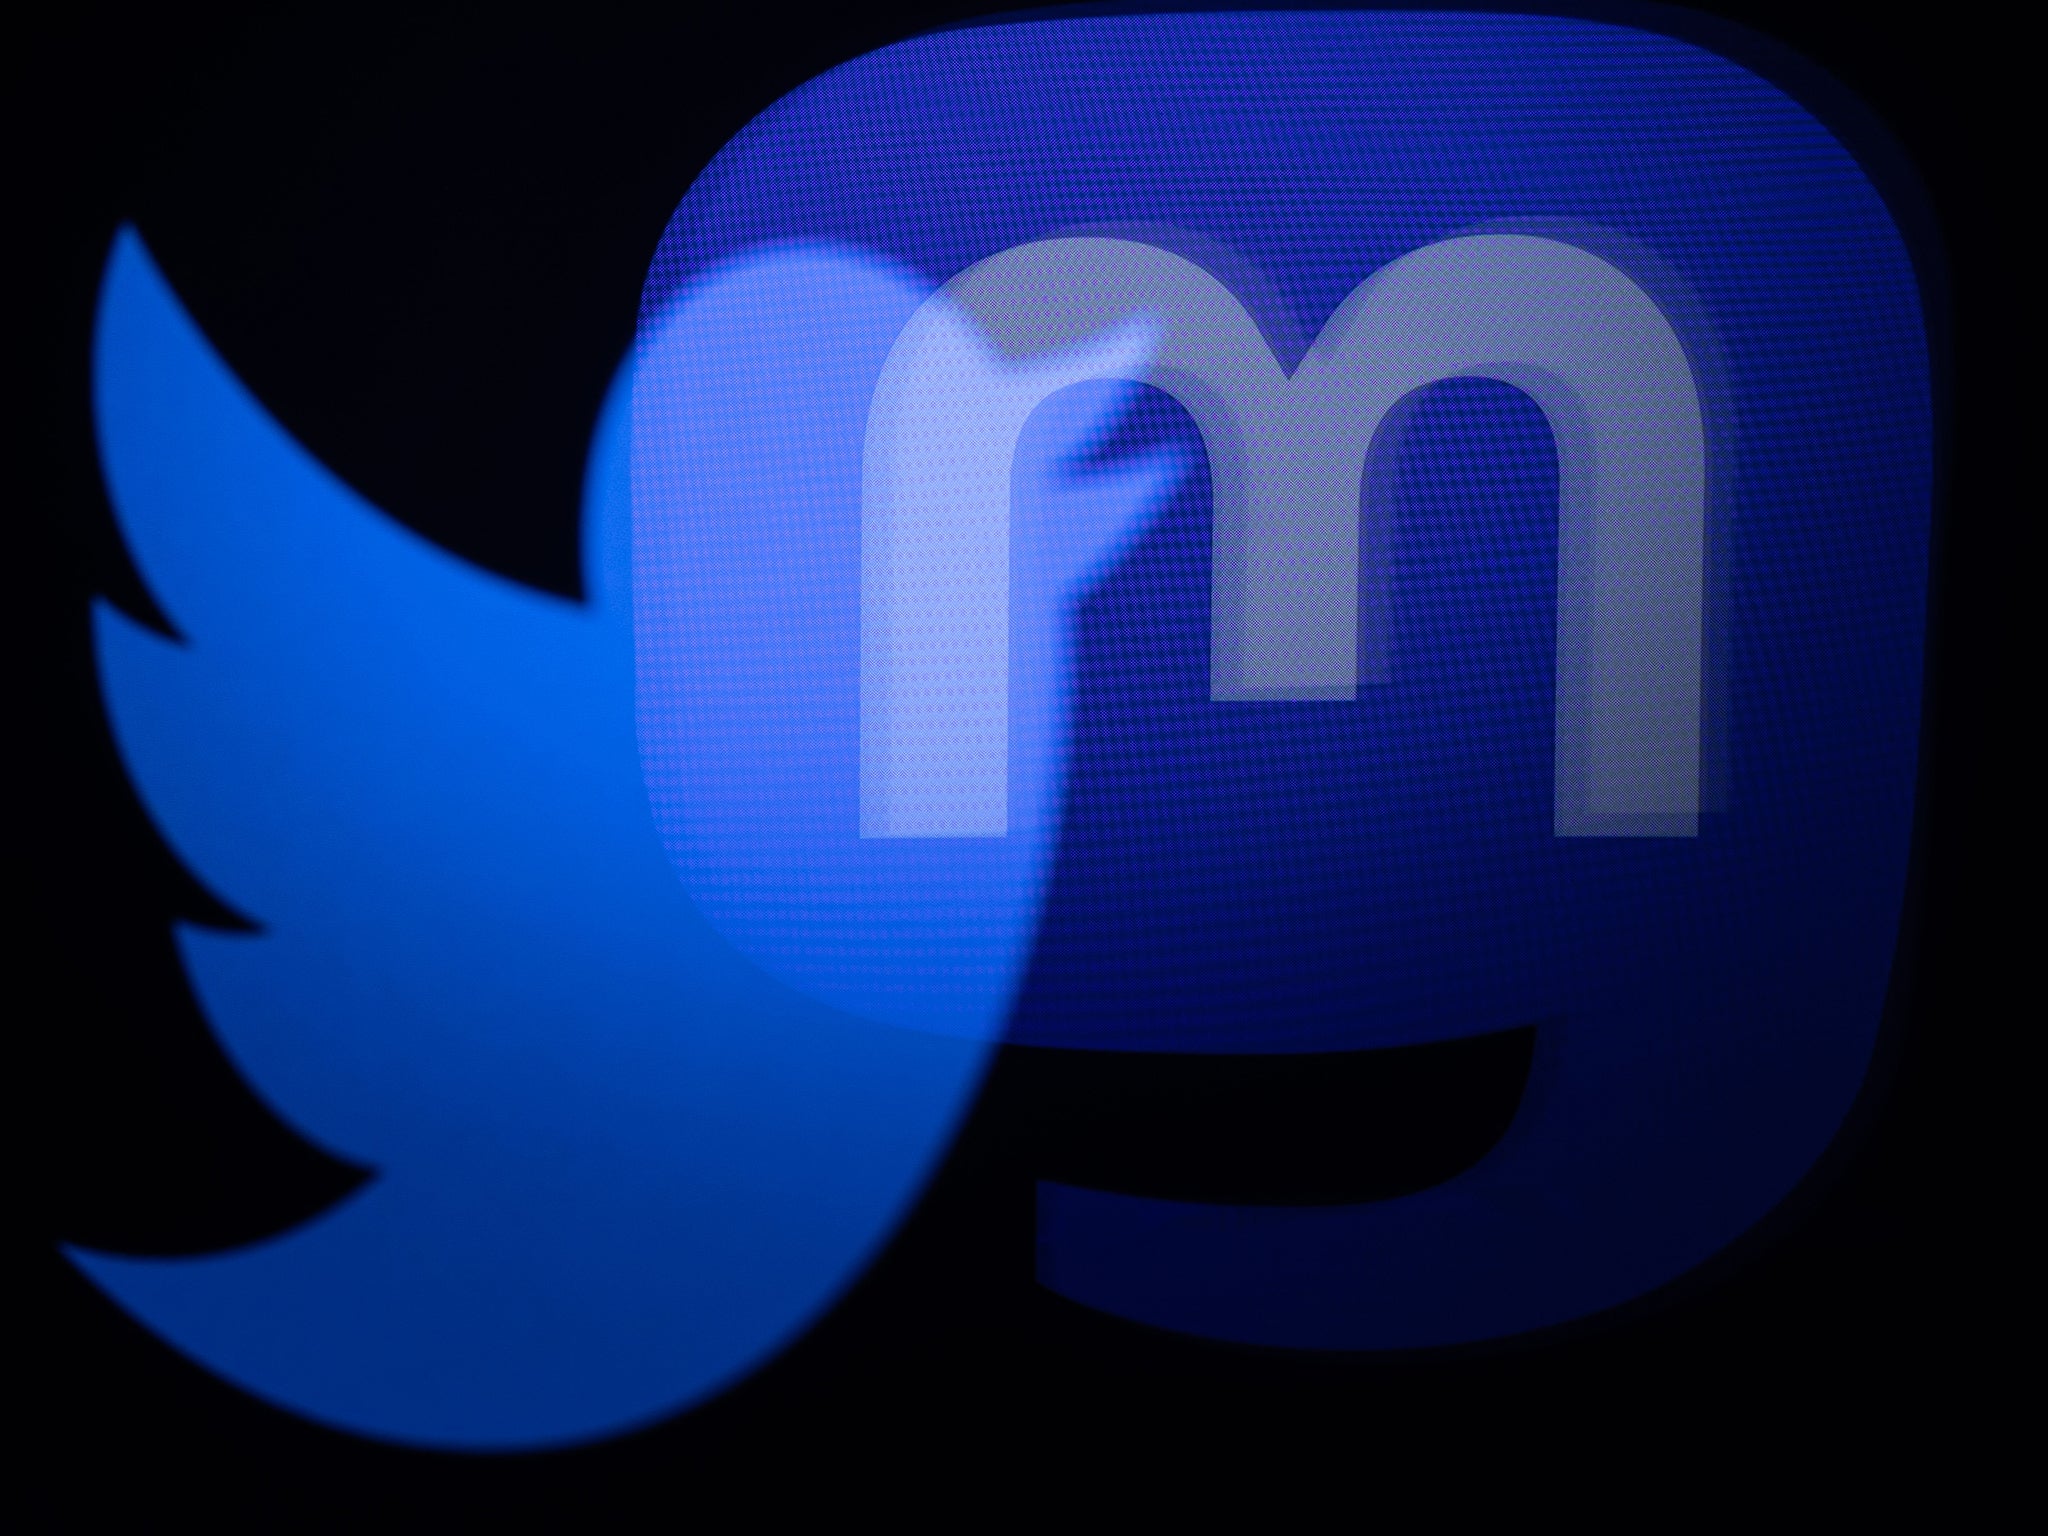 The duelling logos of Twitter and Mastodon